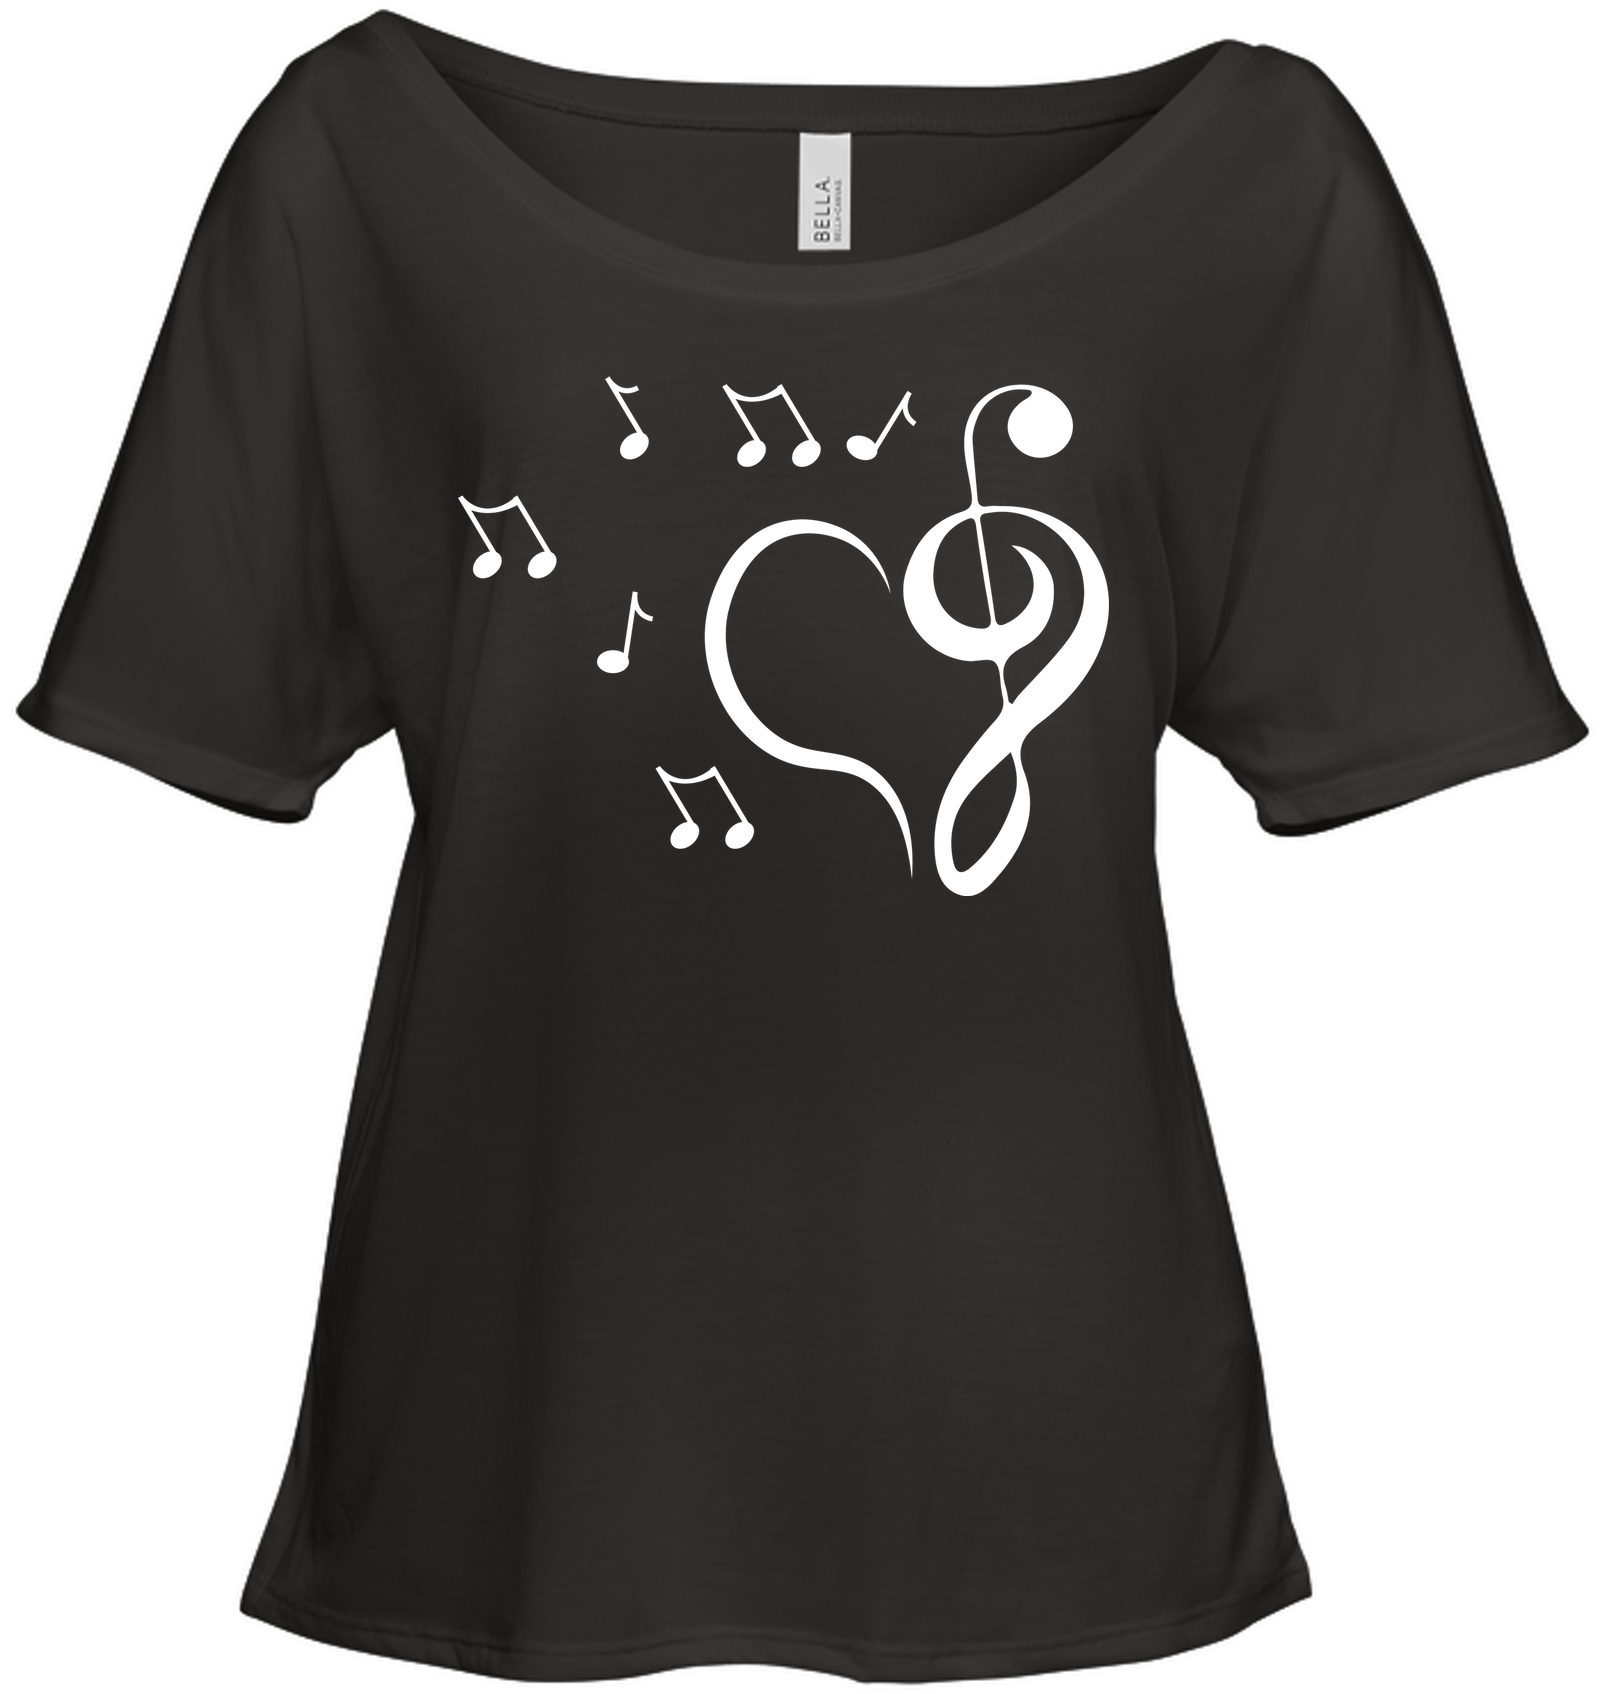 Musical heart with floating notes - Bella + Canvas Women's Slouchy Tee